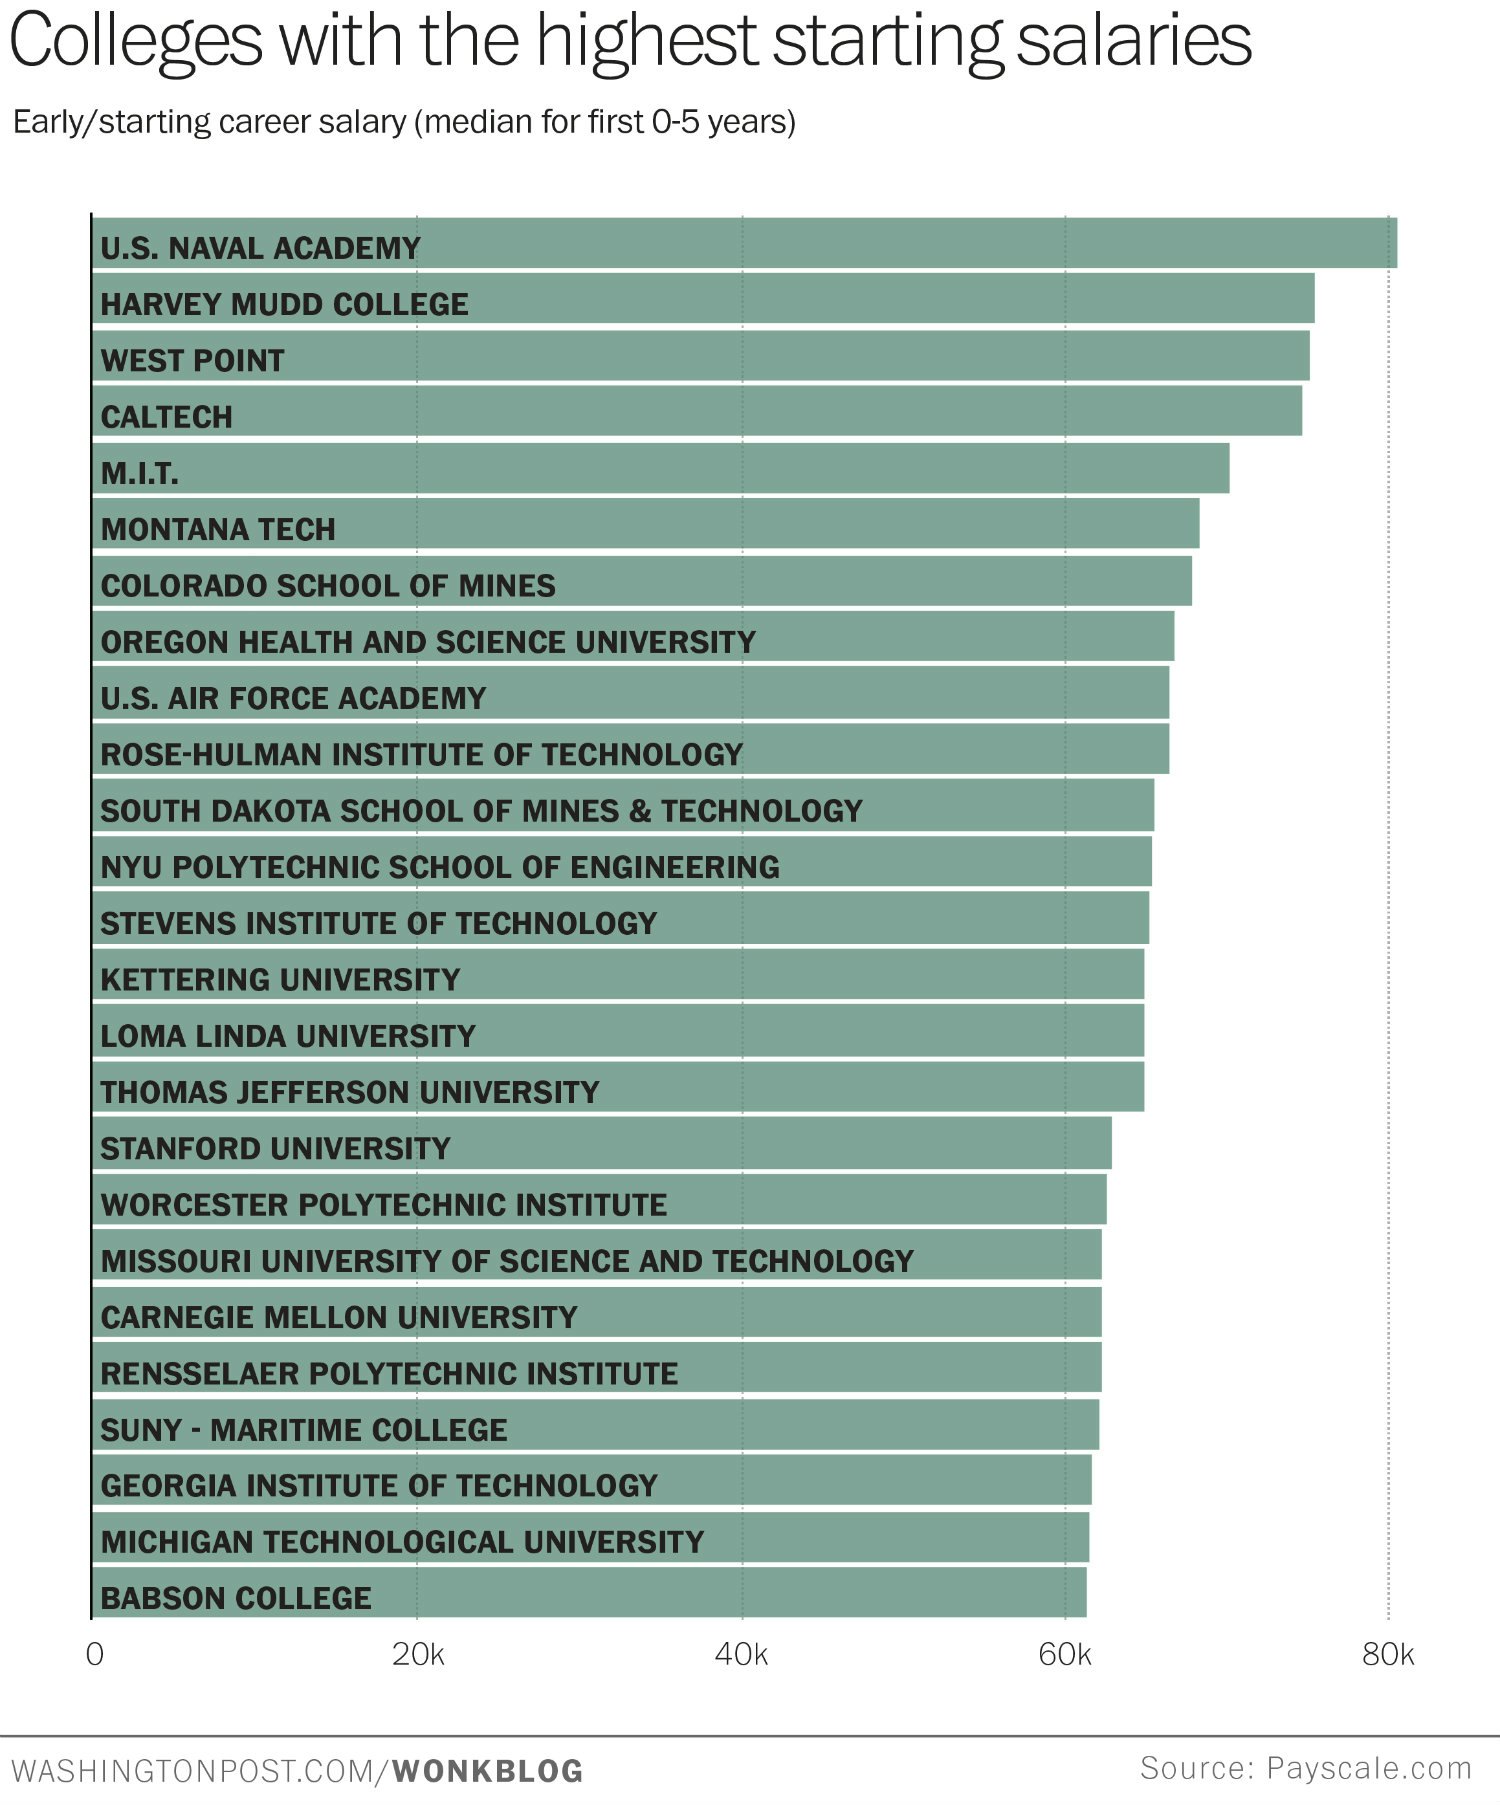 average architect salary out of college by major